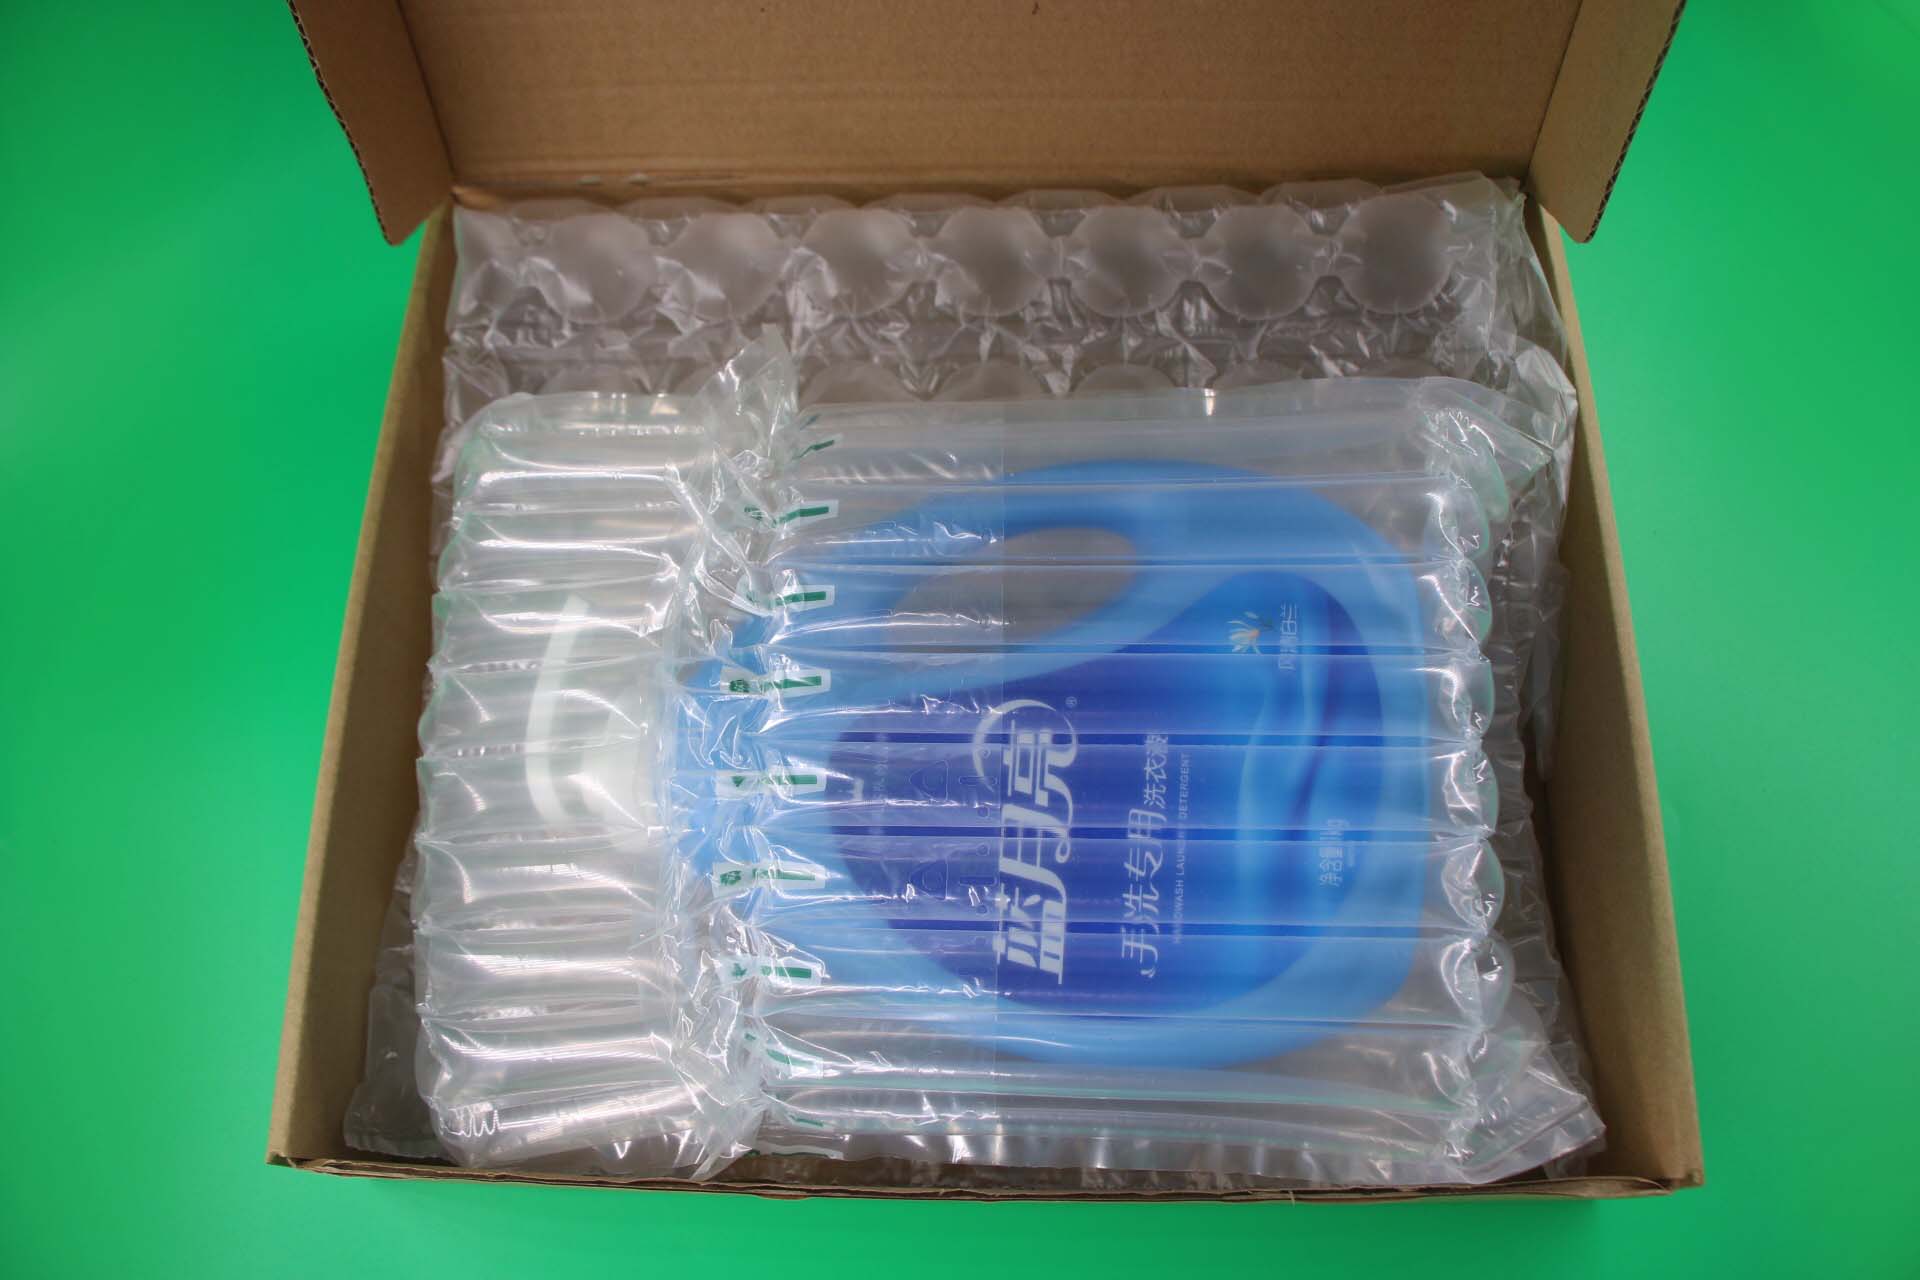 Sunshinepack free sample inflatable air cushion packaging inquire now for delivery